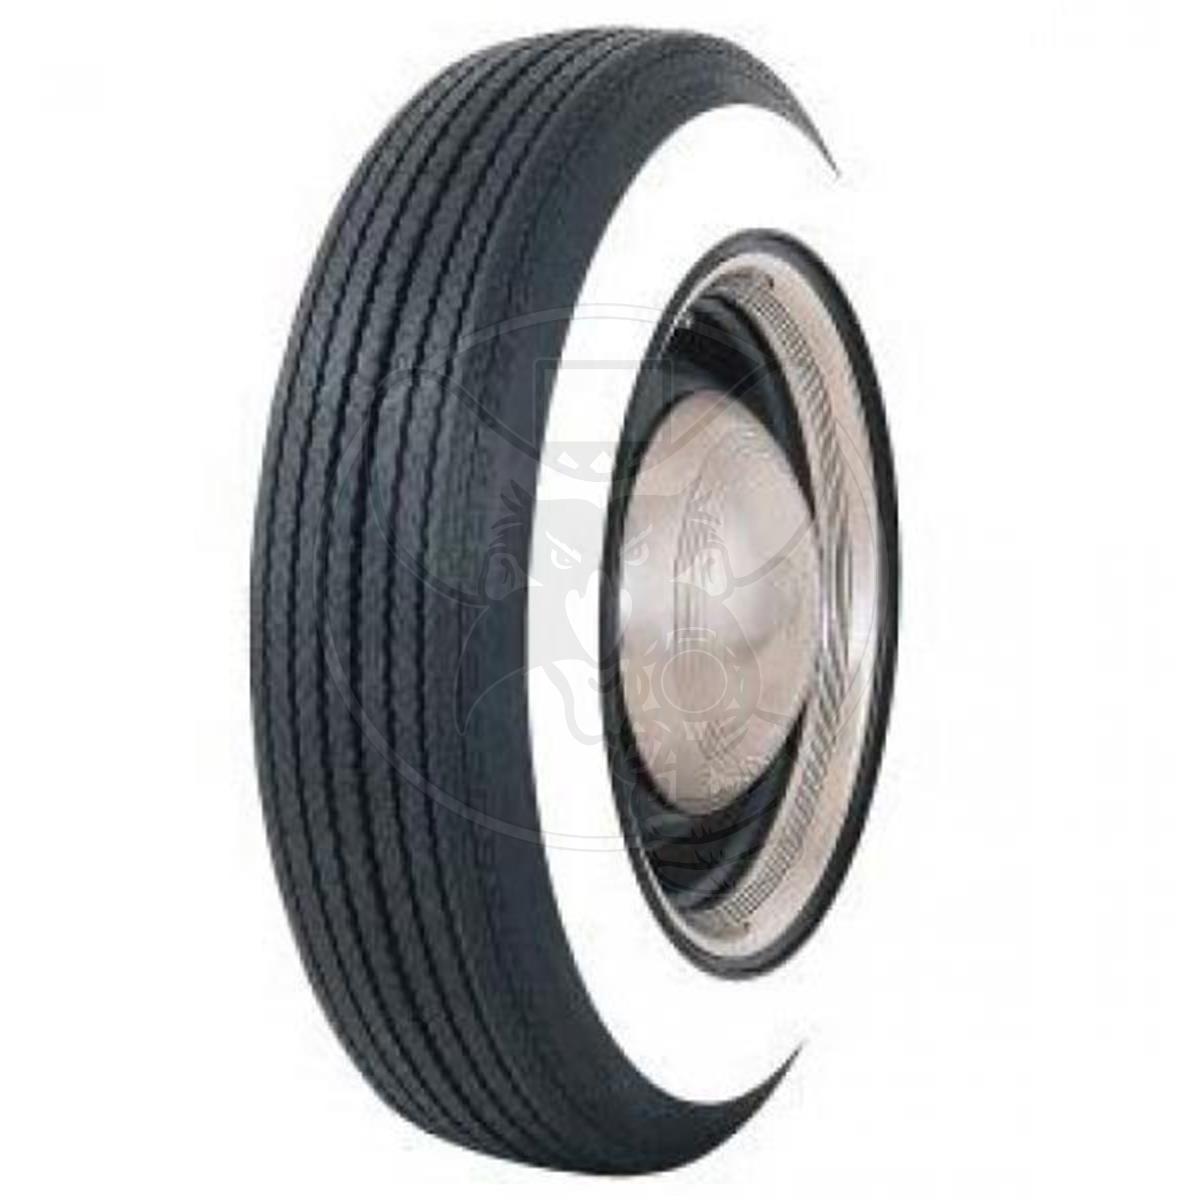 COKER BIAS PLY TYRE G78-15 WITH 2-3/4" WHITEWALL